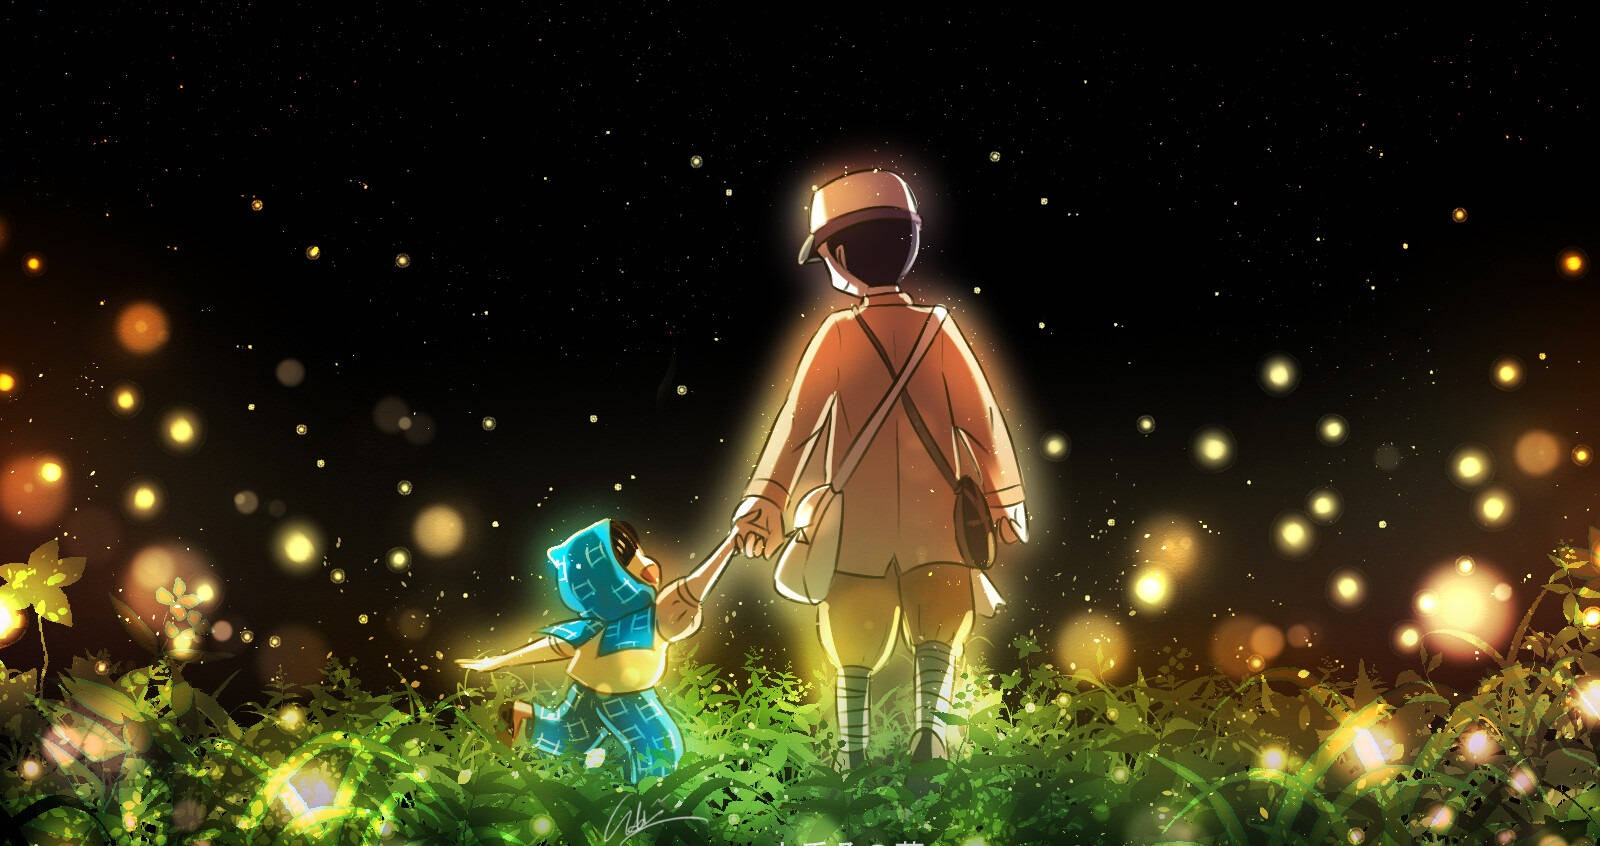 Free Grave Of The Fireflies Wallpaper Downloads, [100+] Grave Of The Fireflies  Wallpapers for FREE 